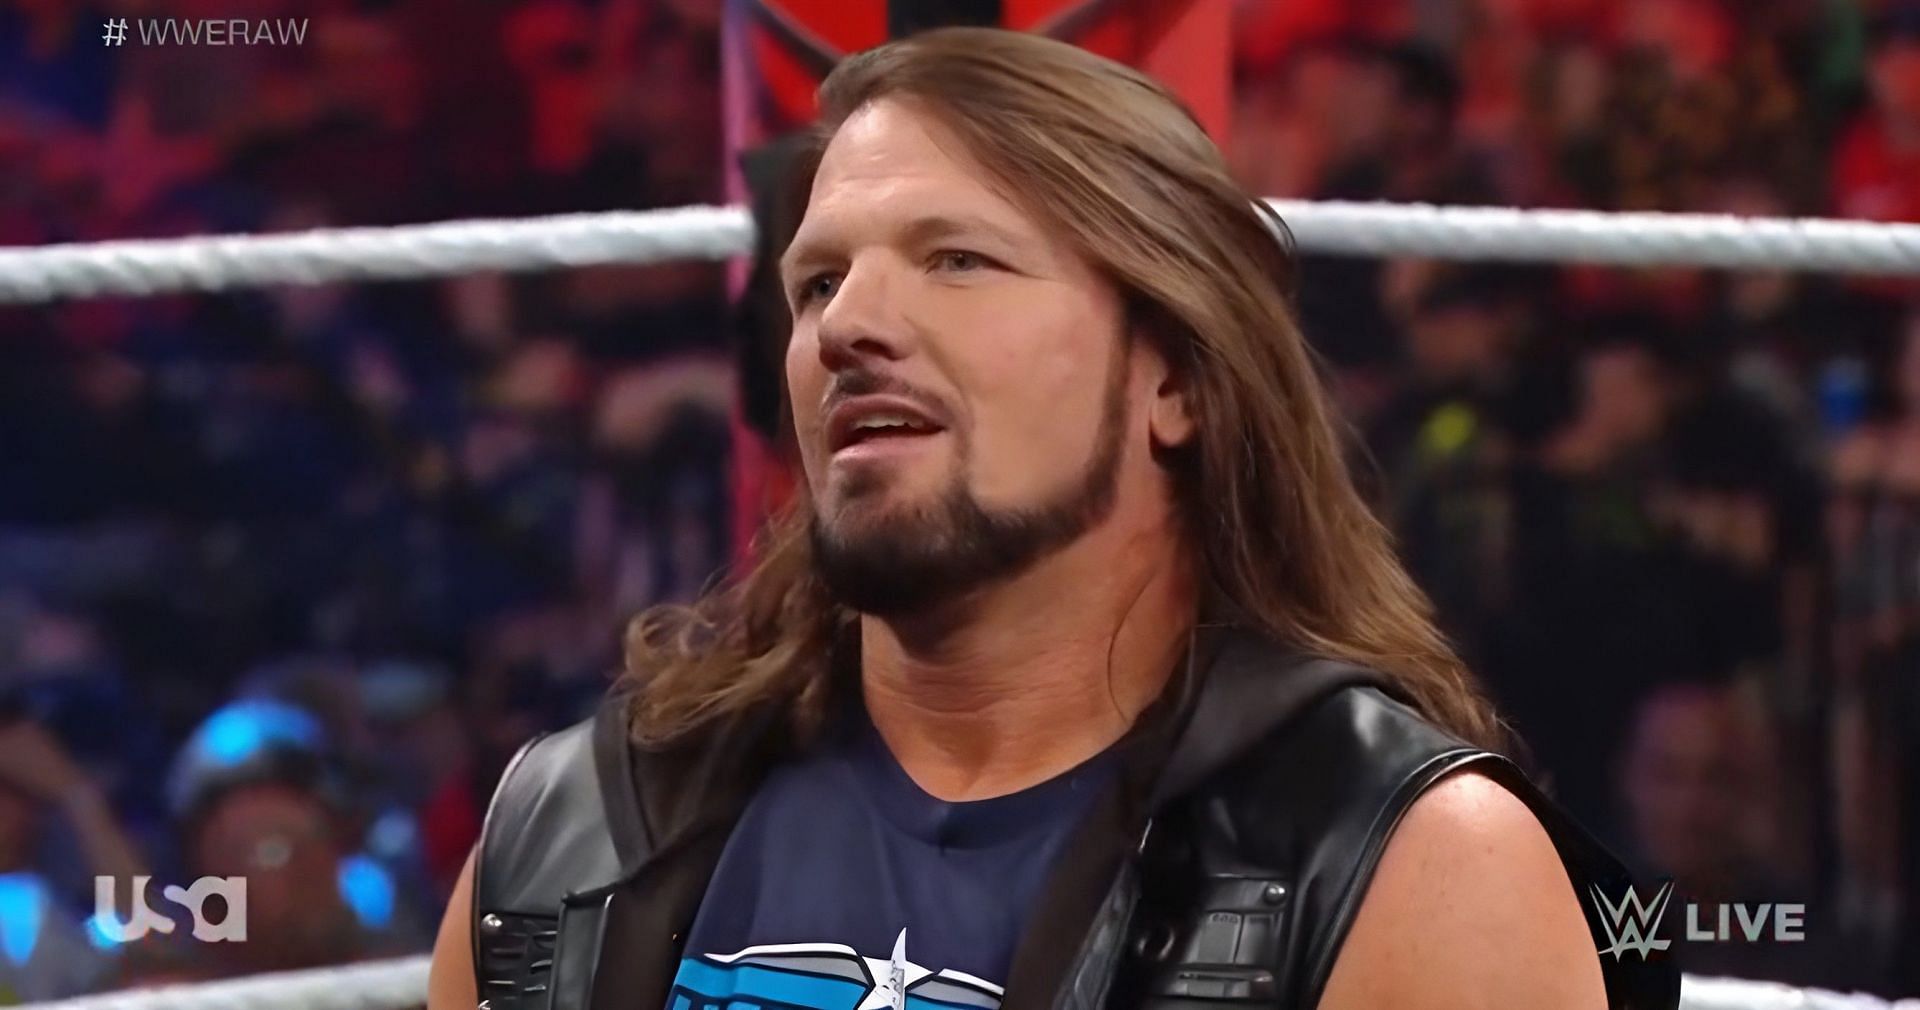 AJ Styles is reminded of his losing streak on RAW.